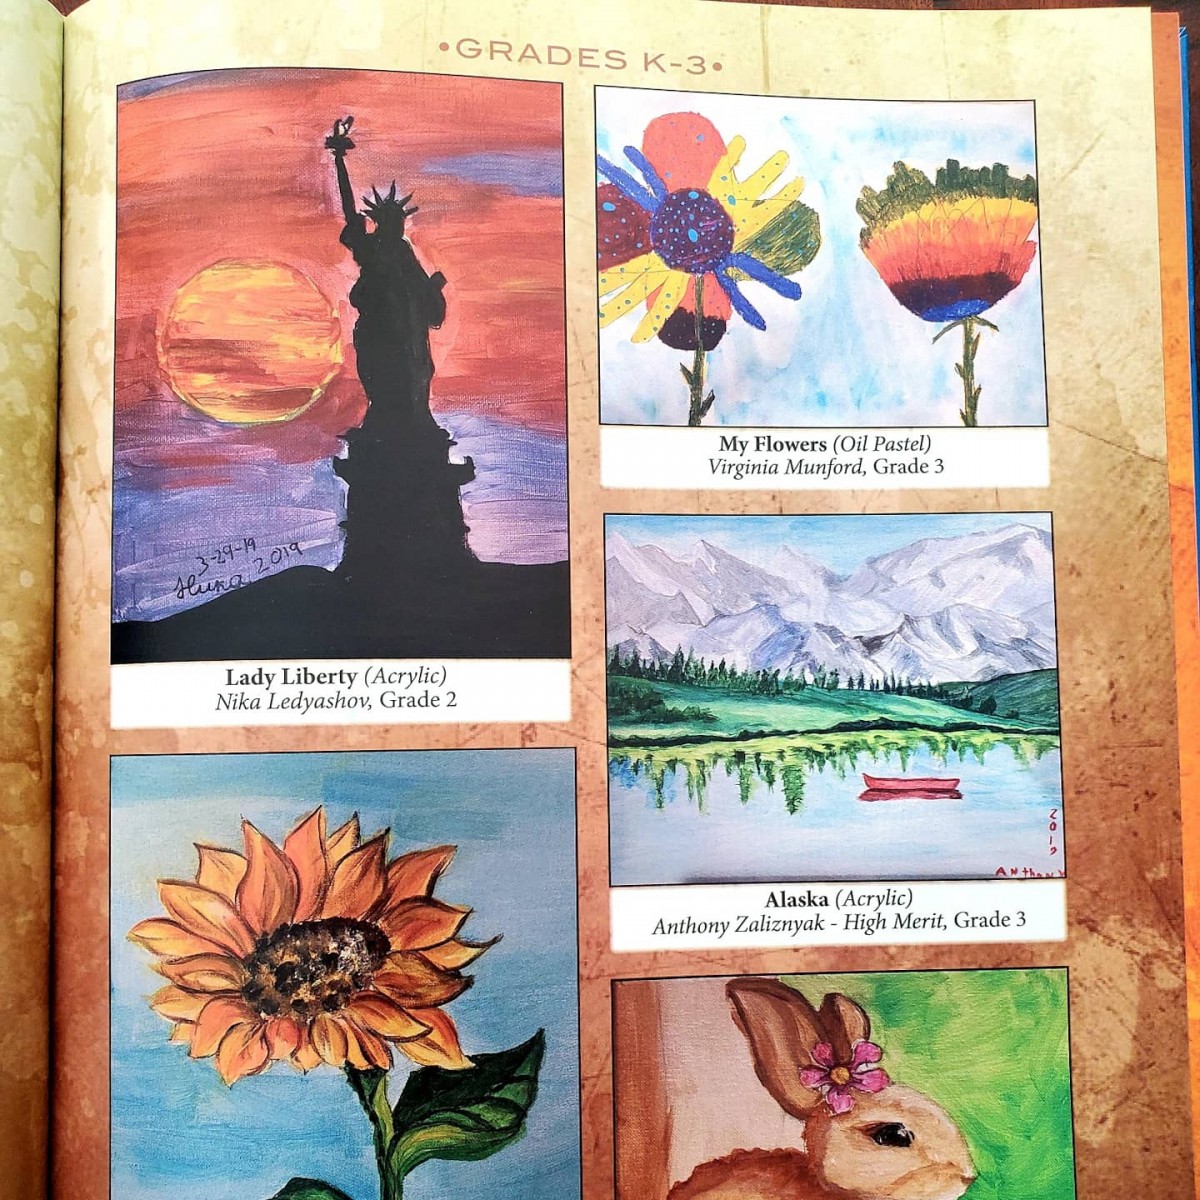 Pages of the book with artwork submitted by Meadow Hill scholars.